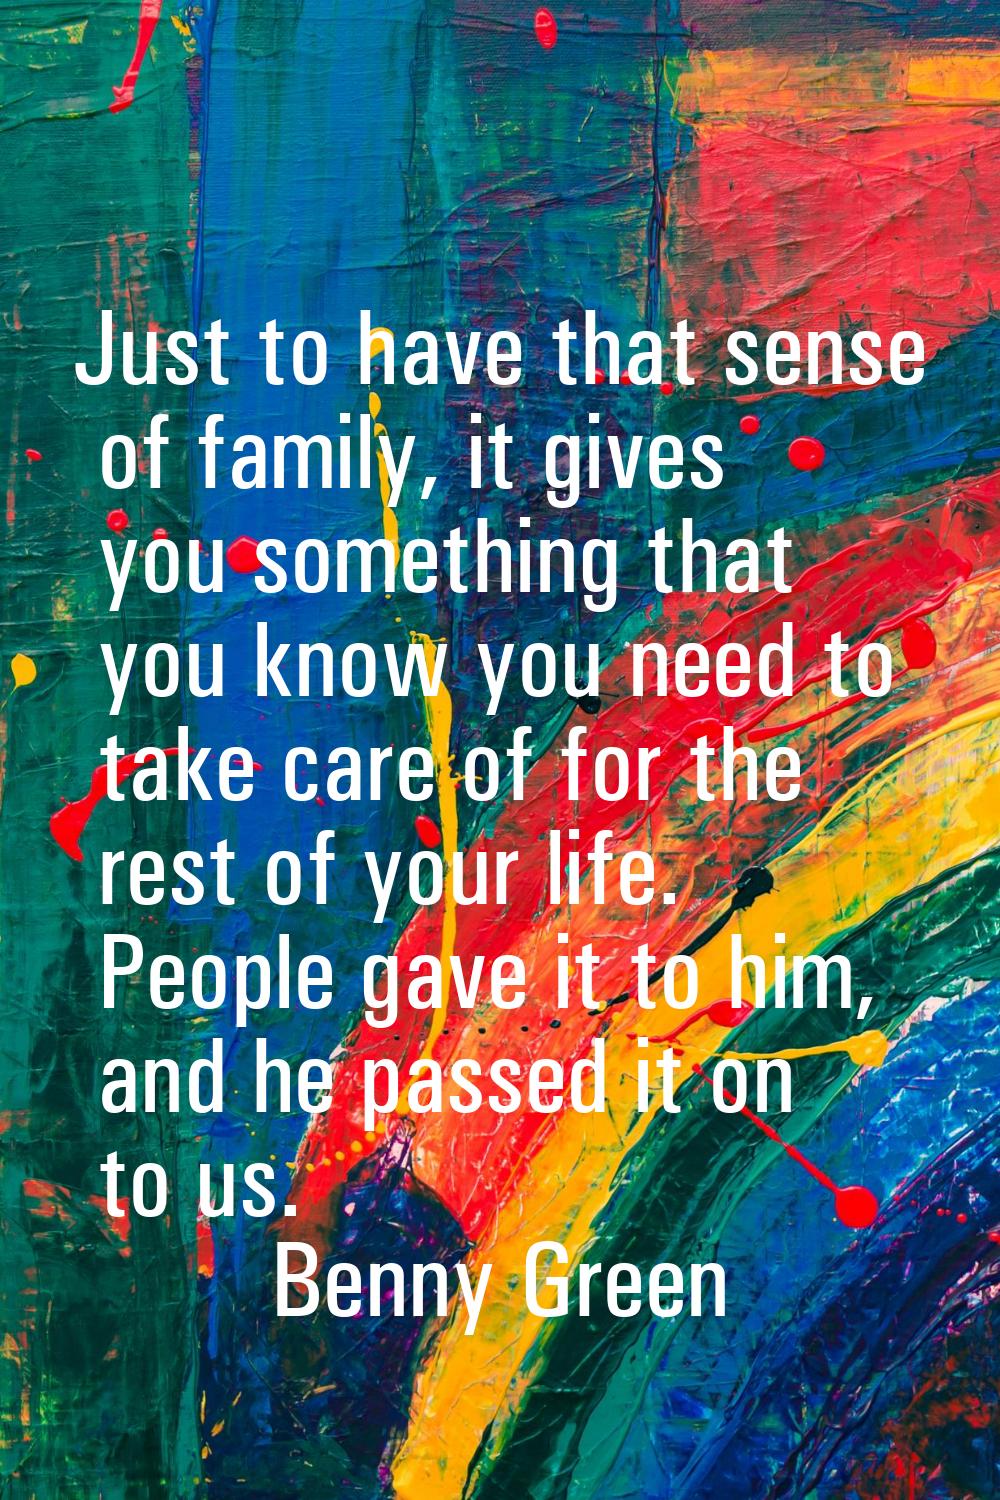 Just to have that sense of family, it gives you something that you know you need to take care of fo